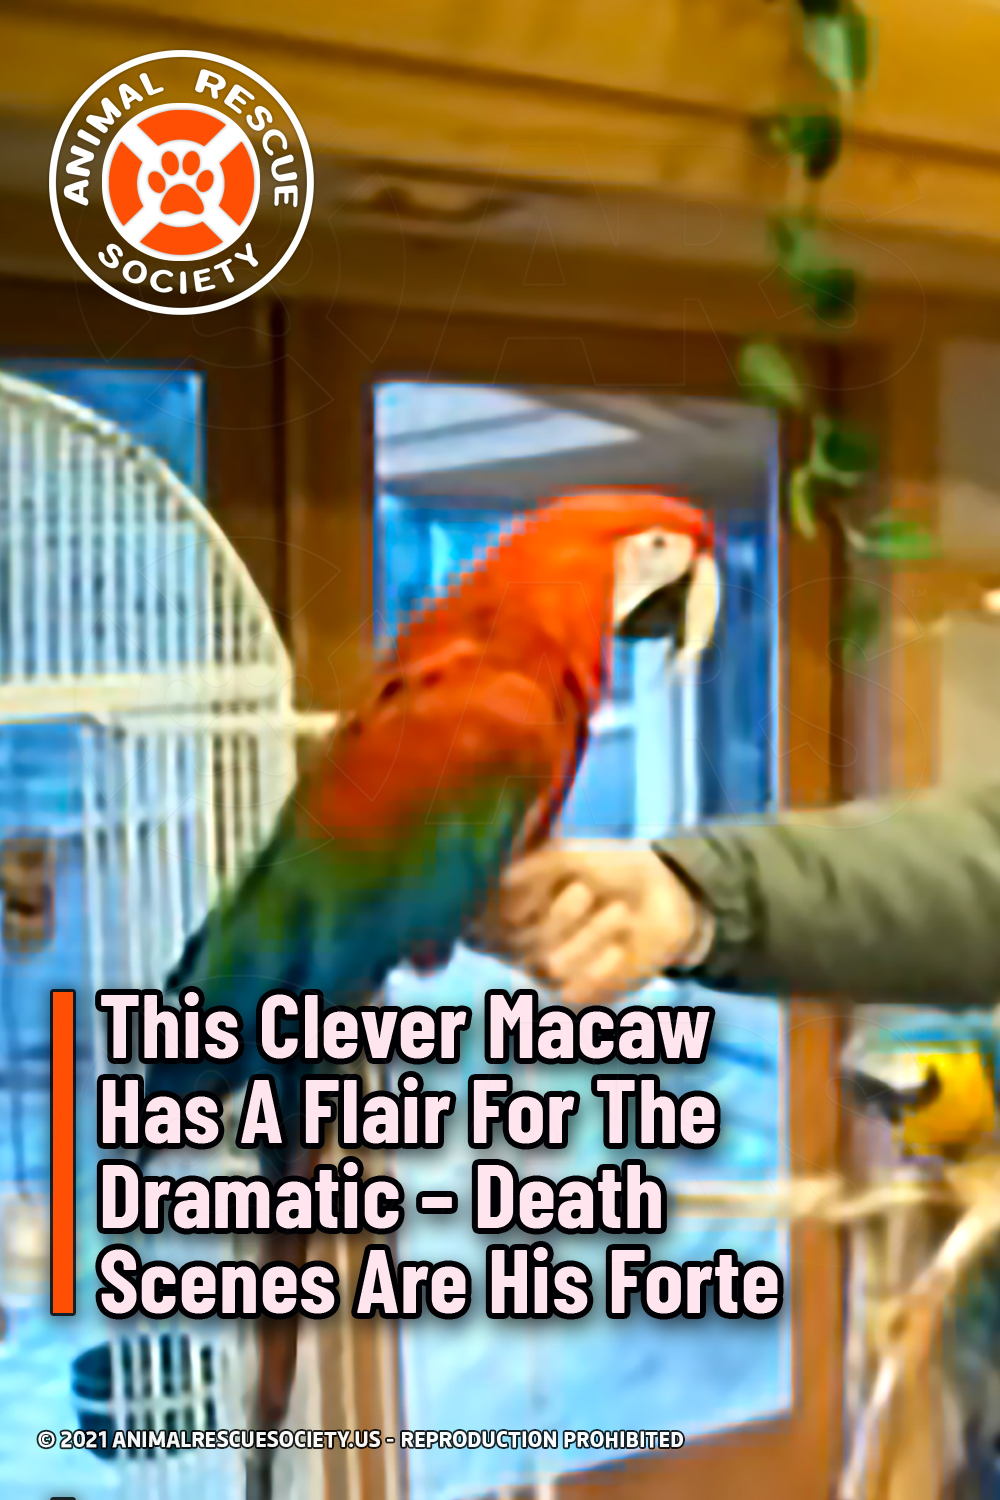 This Clever Macaw Has A Flair For The Dramatic – Death Scenes Are His Forte